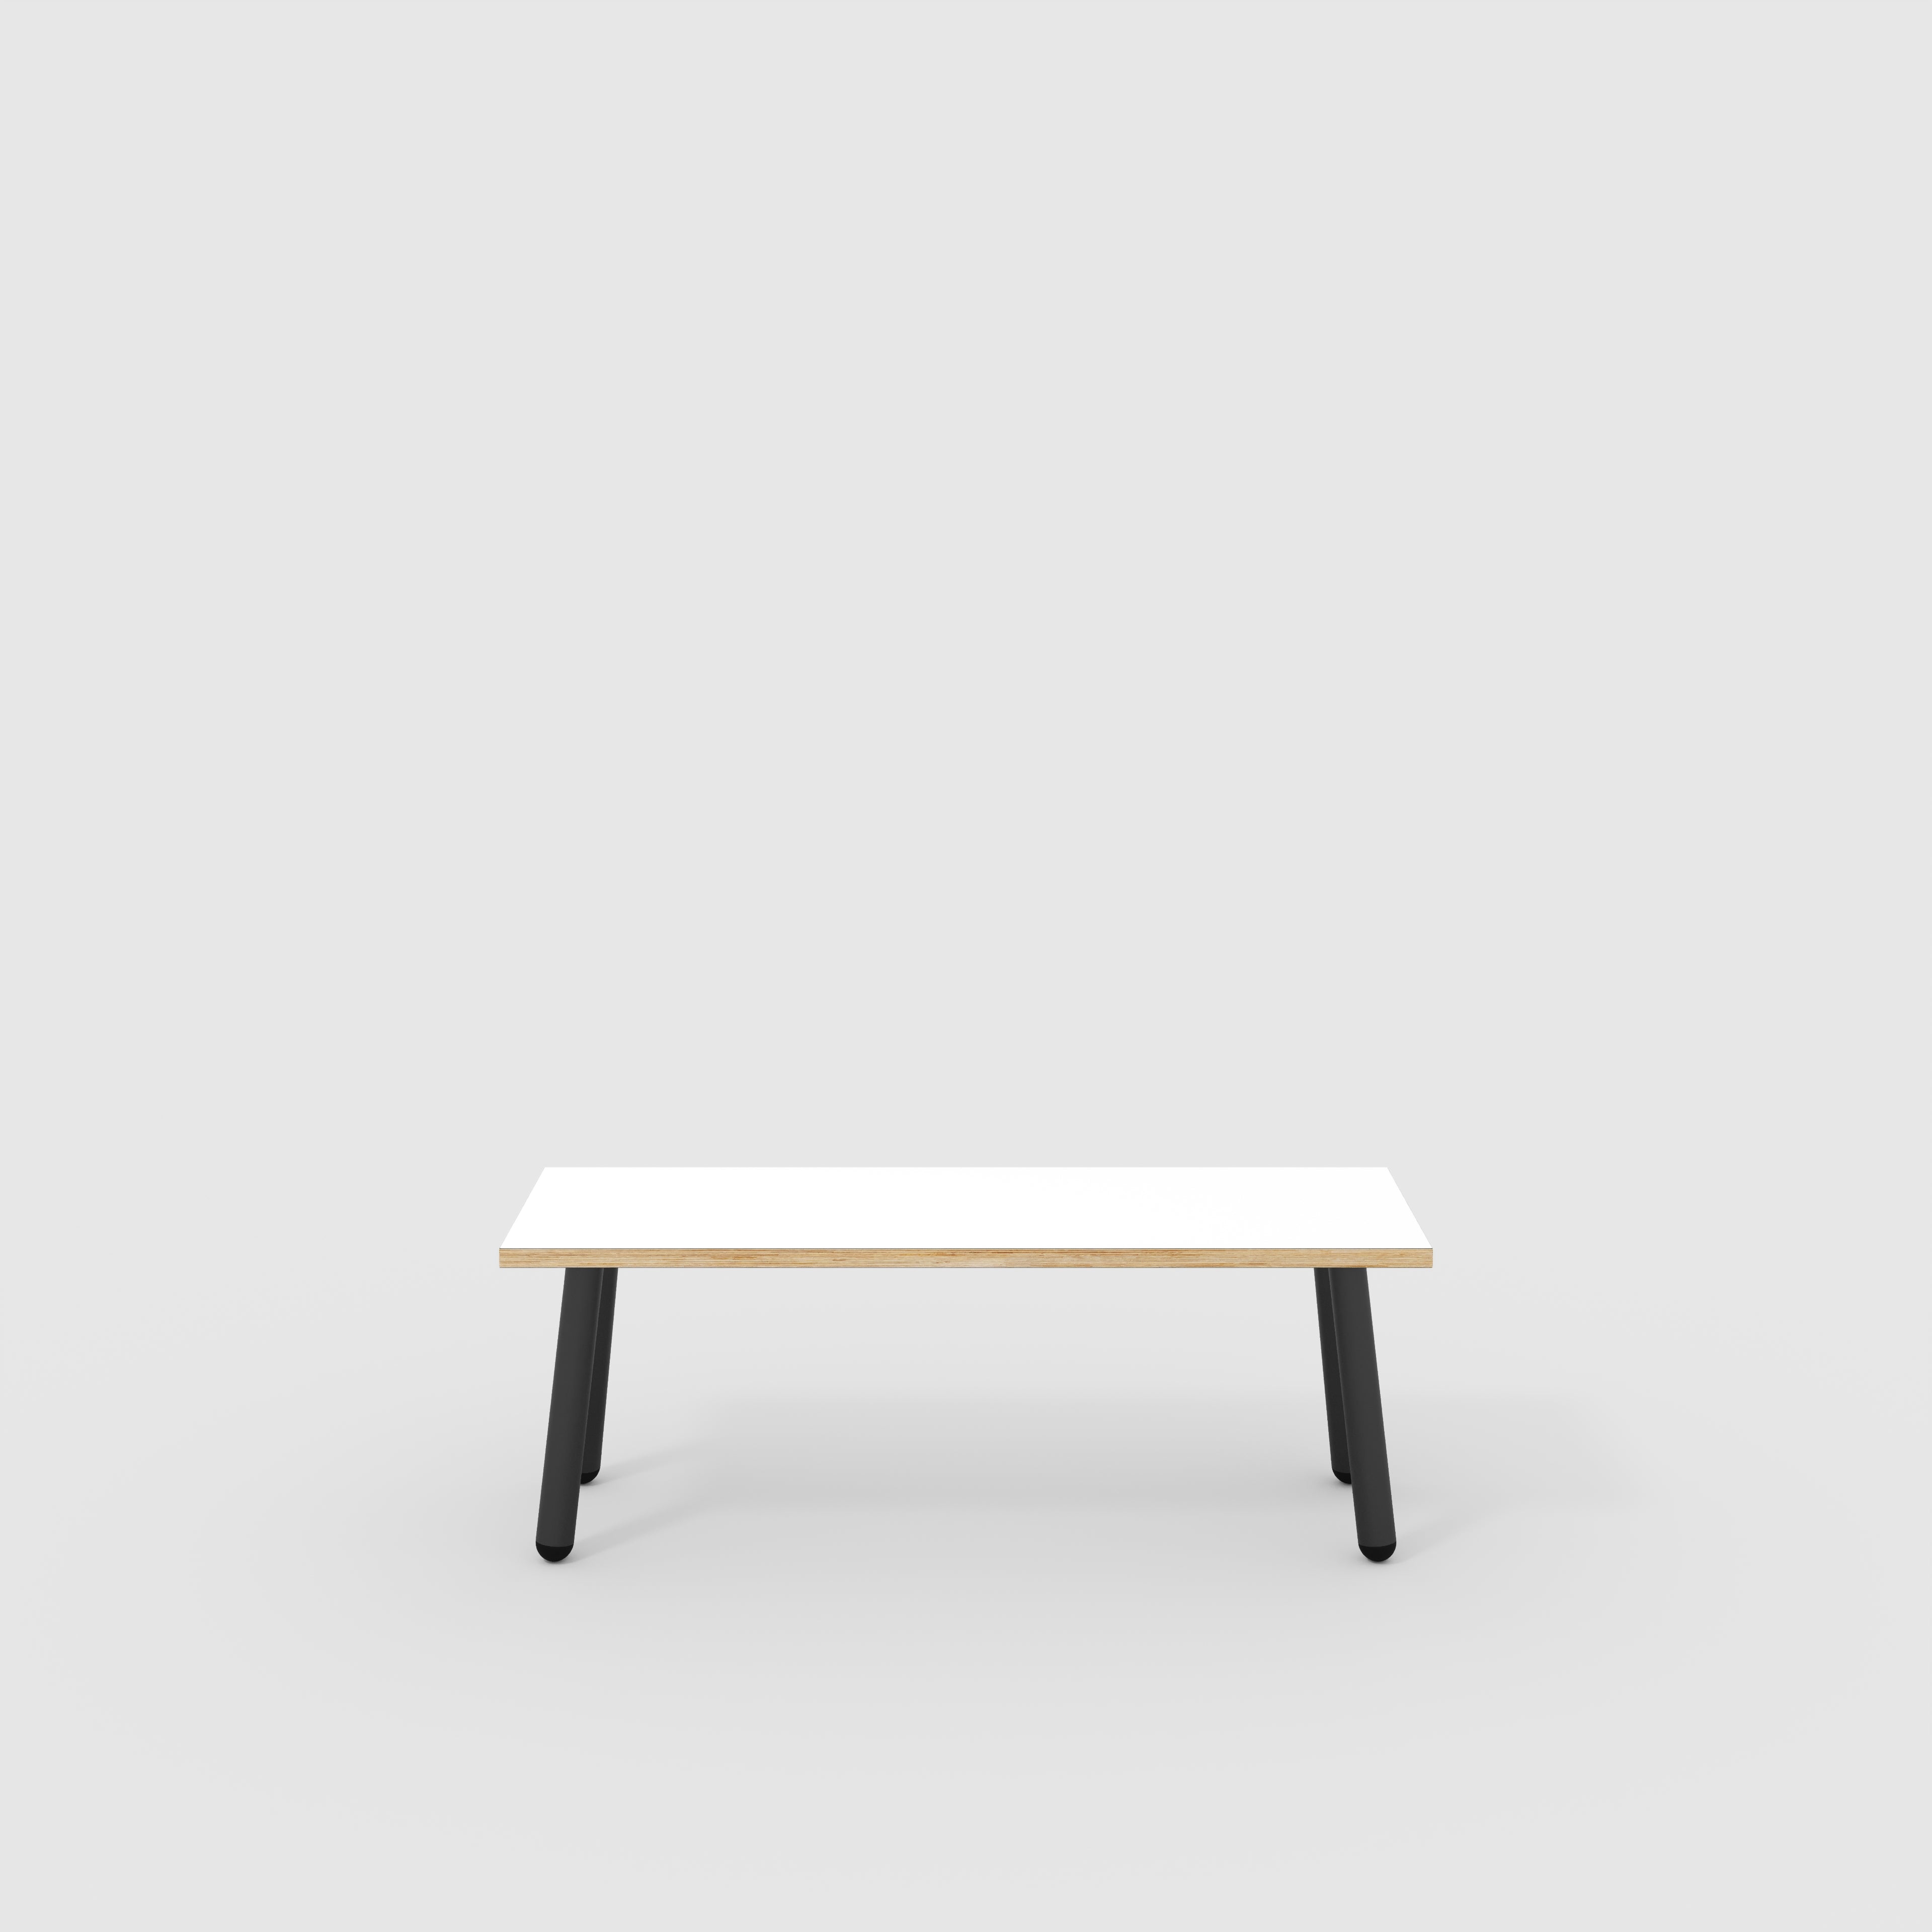 Bench Seat with Black Round Single Pin Legs - Formica White - 1200(w) x 400(d)